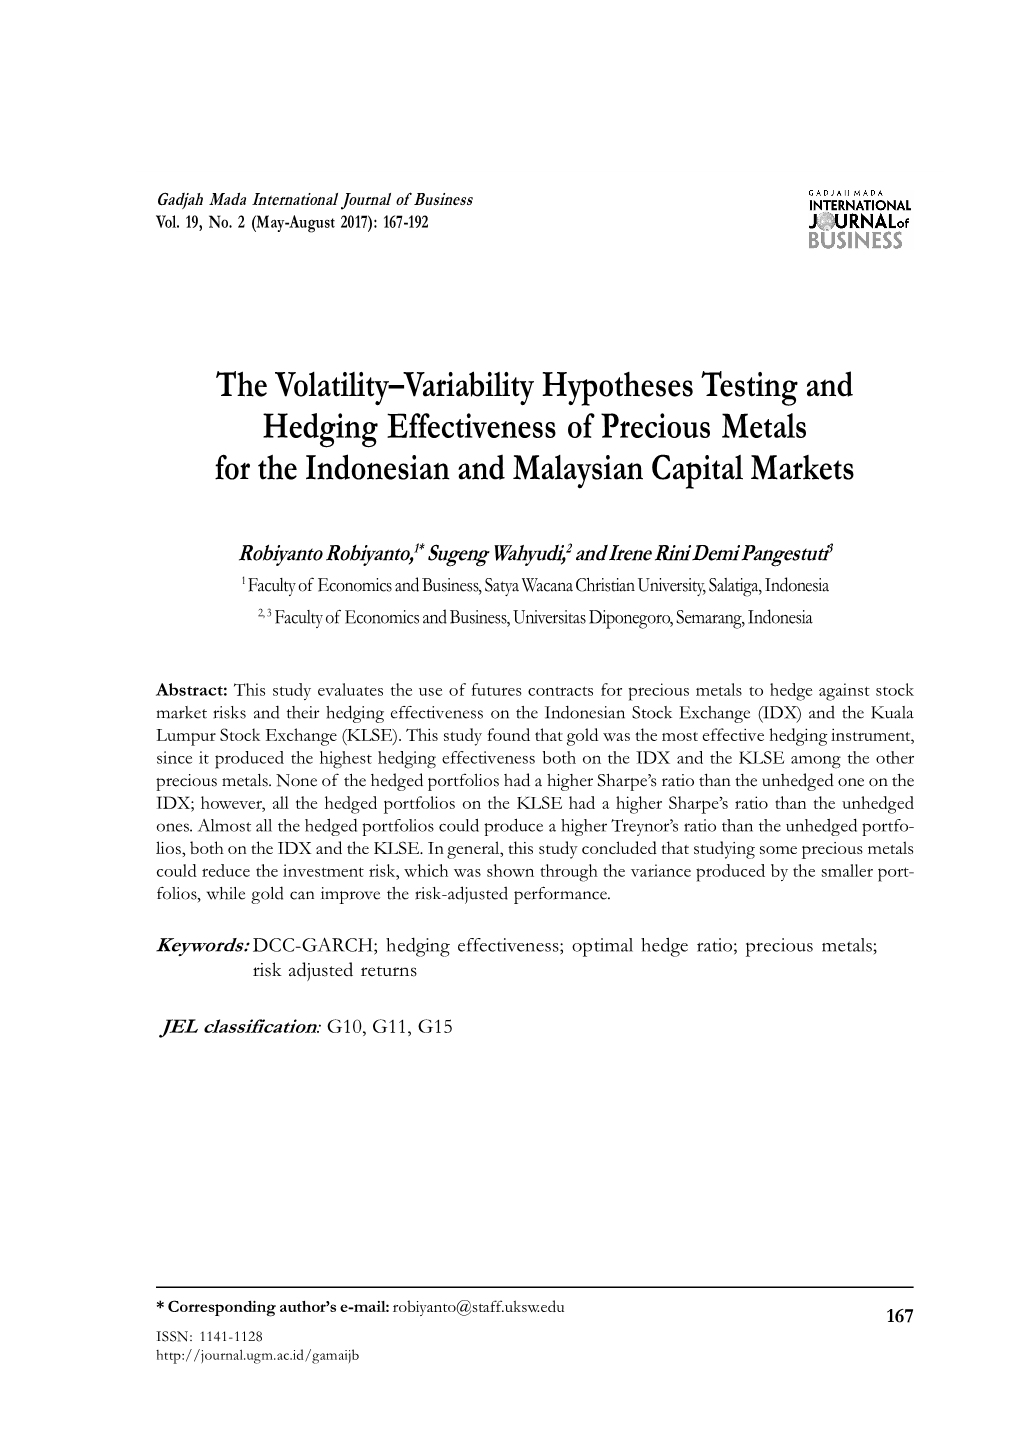 The Volatility–Variability Hypotheses Testing and Hedging Effectiveness of Precious Metals for the Indonesian and Malaysian Capital Markets